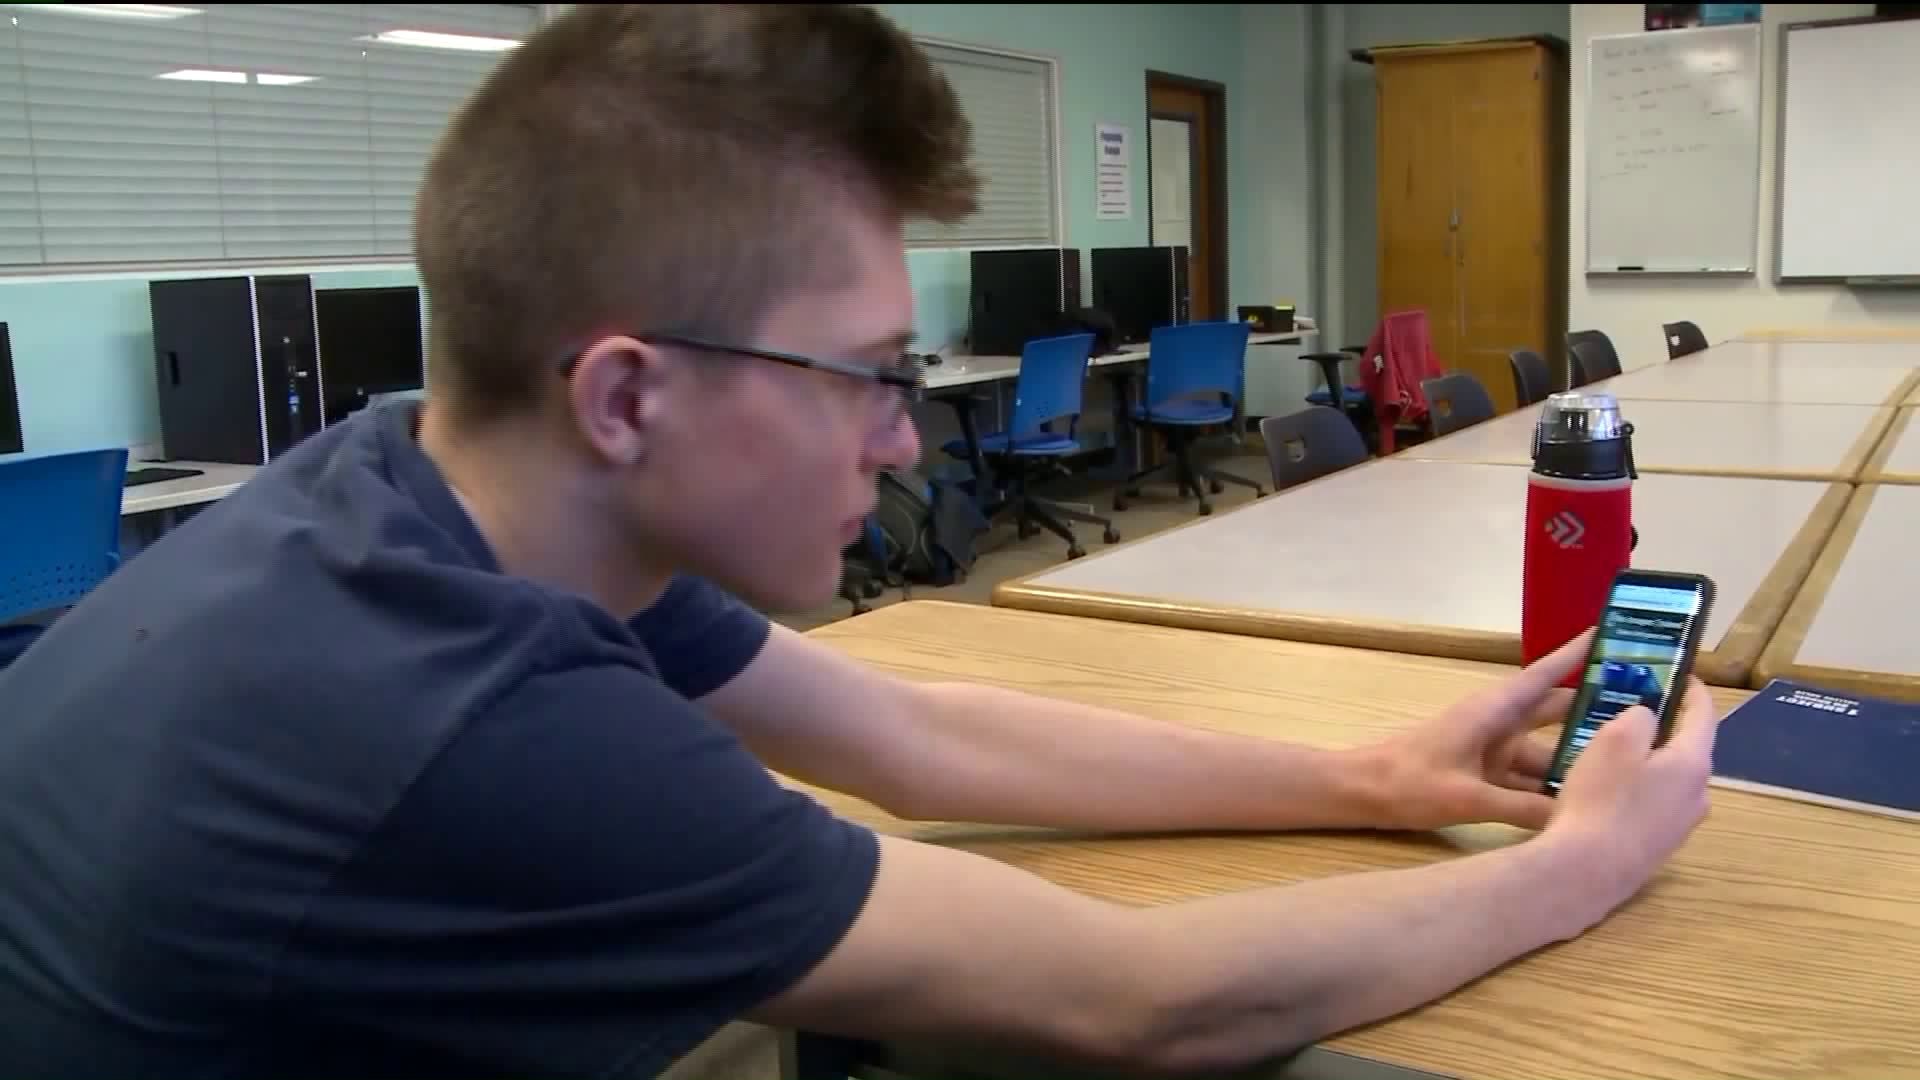 NASA dreams could come true for Milford high school student